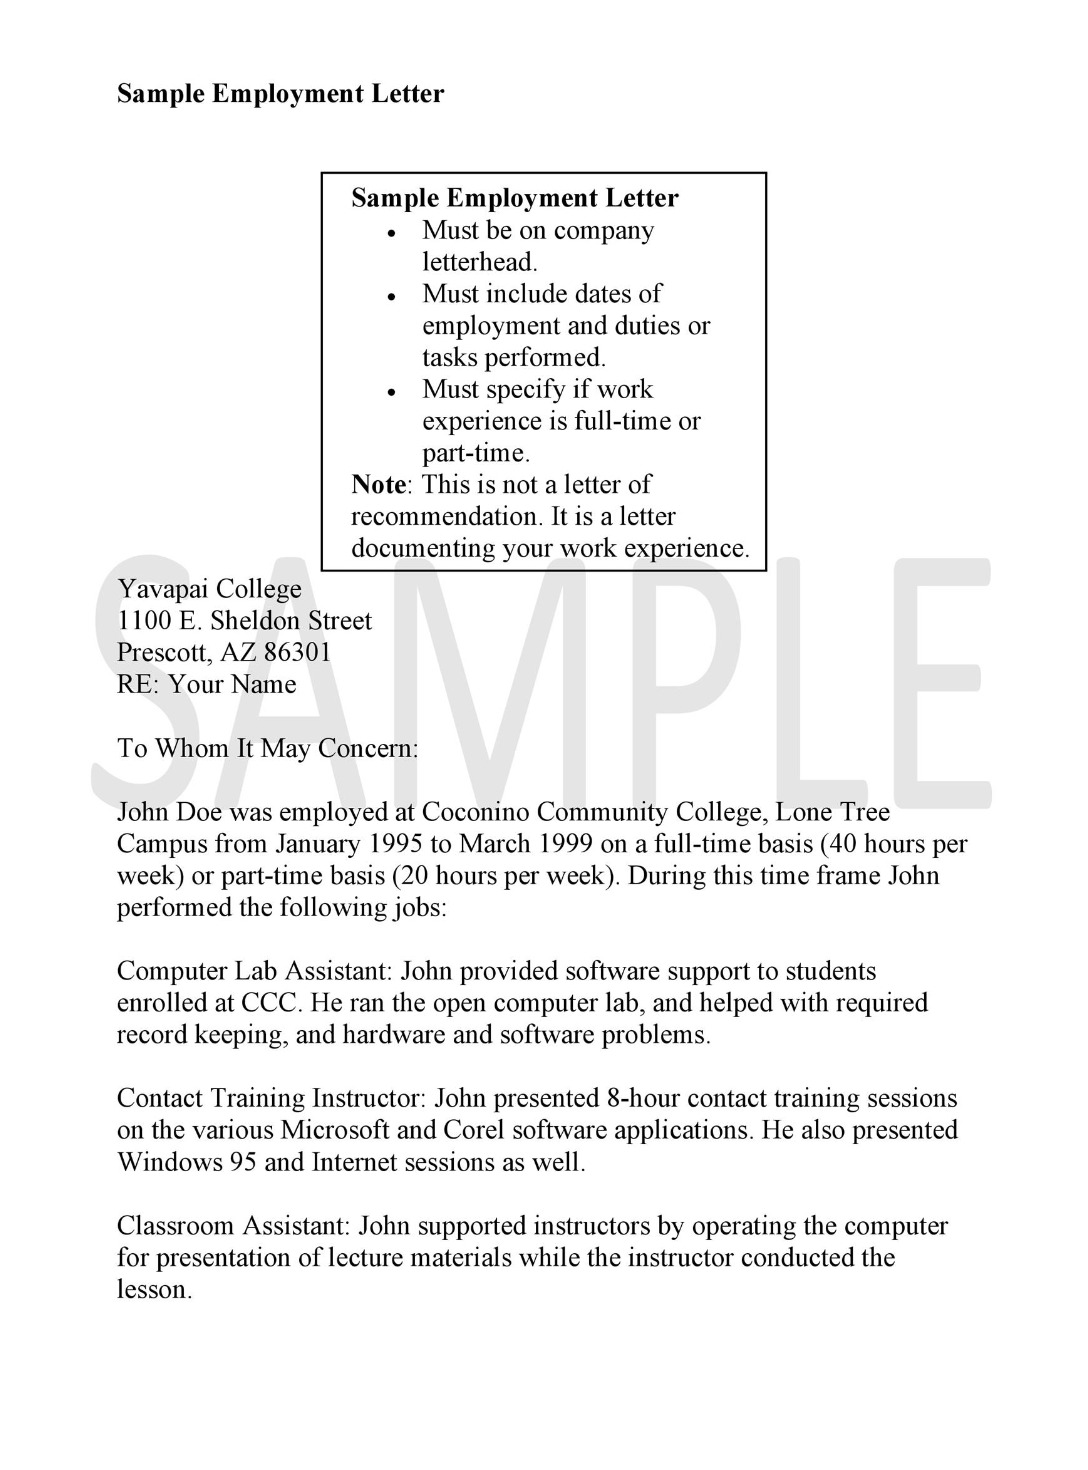 college to whom it may concern letter template